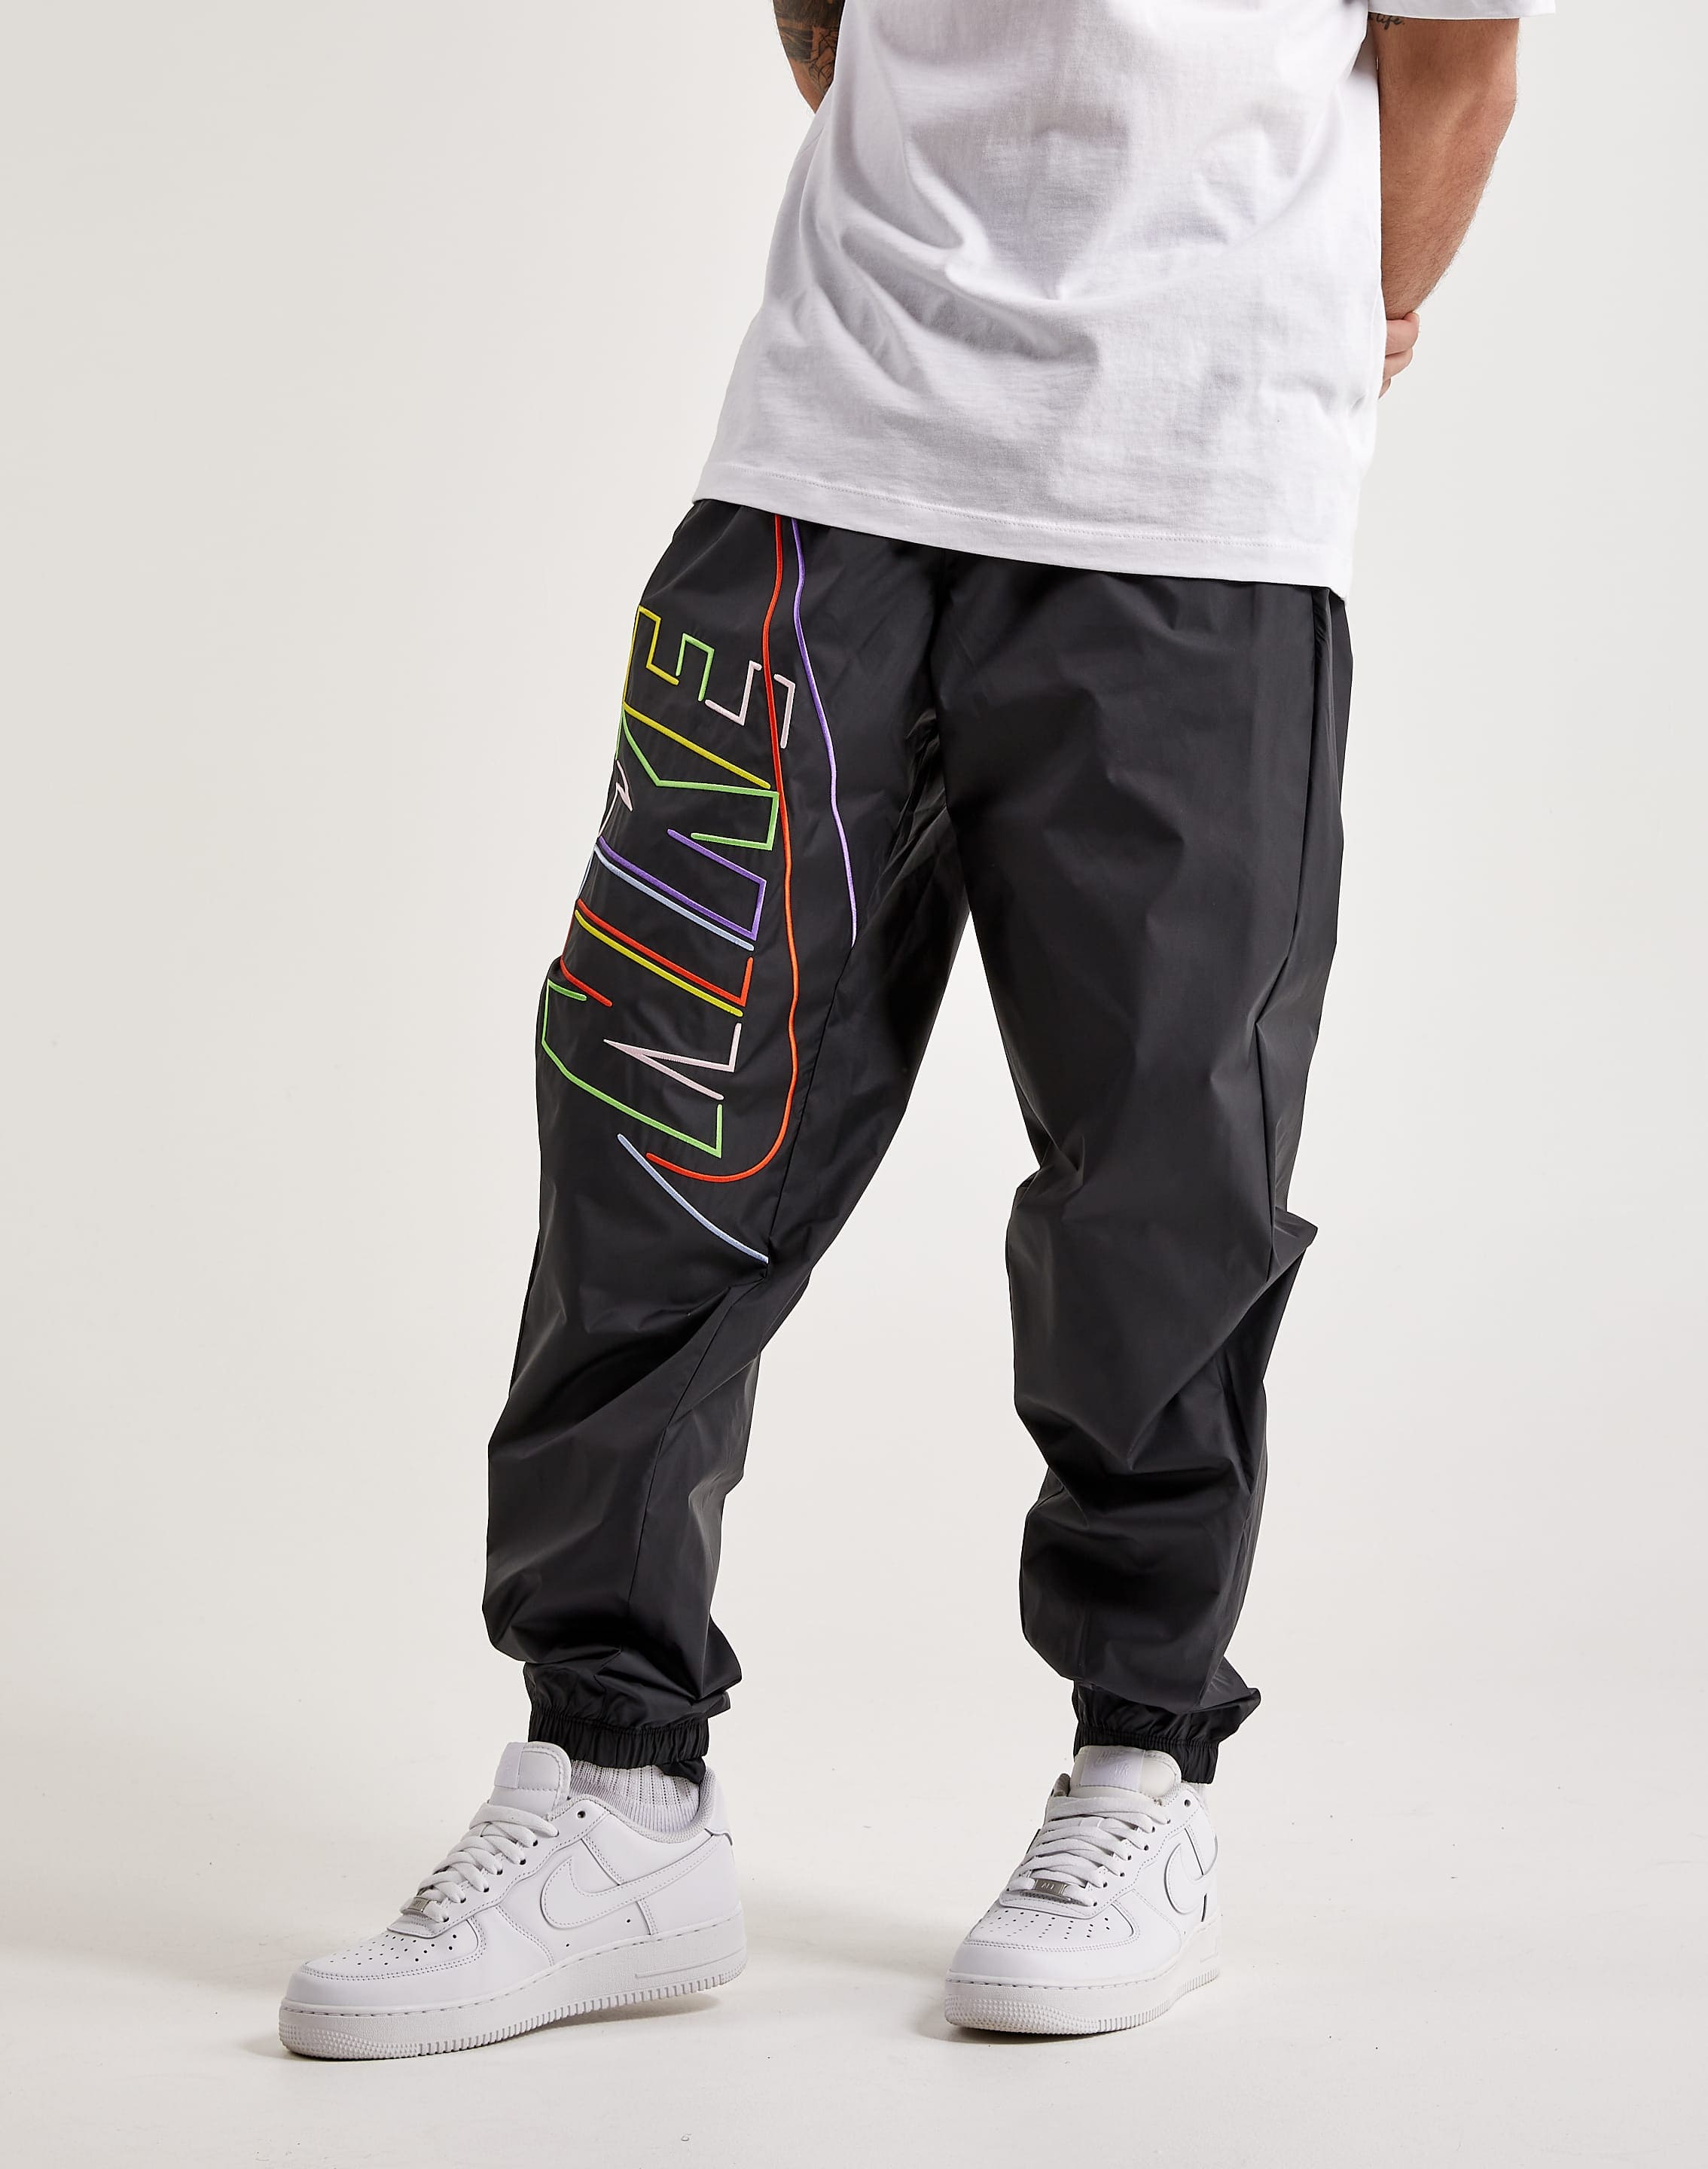 Club Woven Pants DTLR